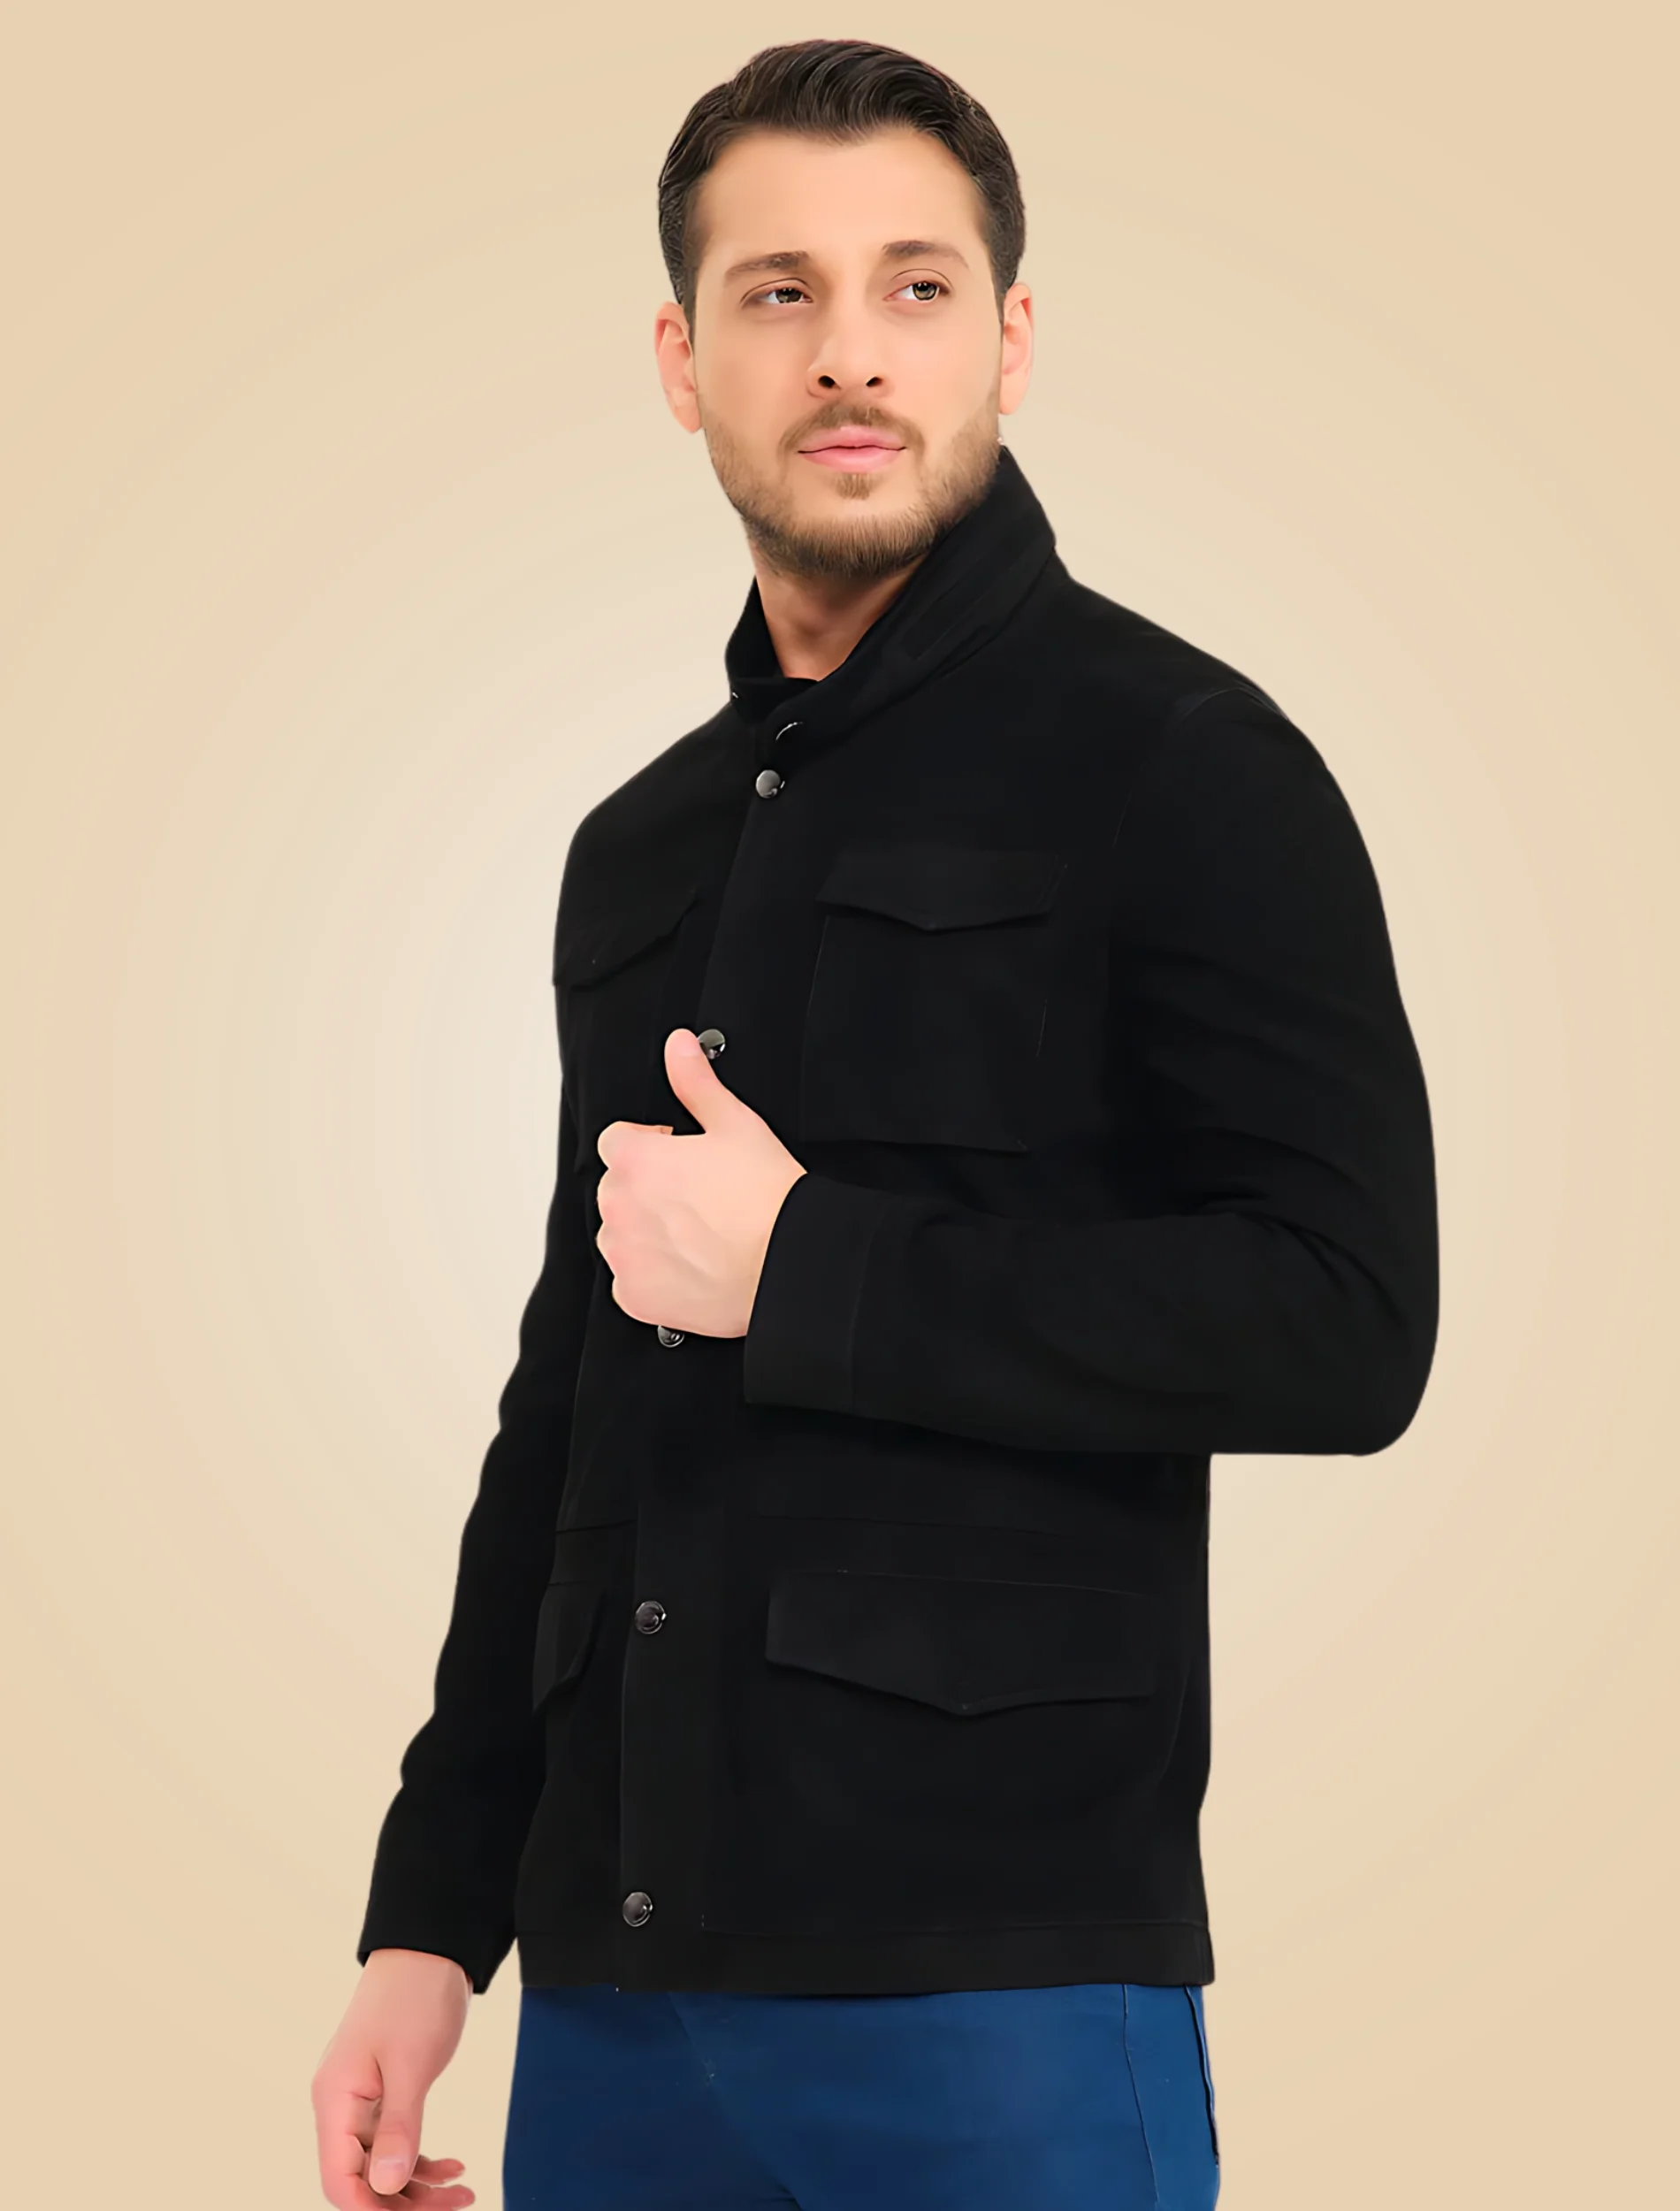 Mens Classic Black Suede Leather Jacket